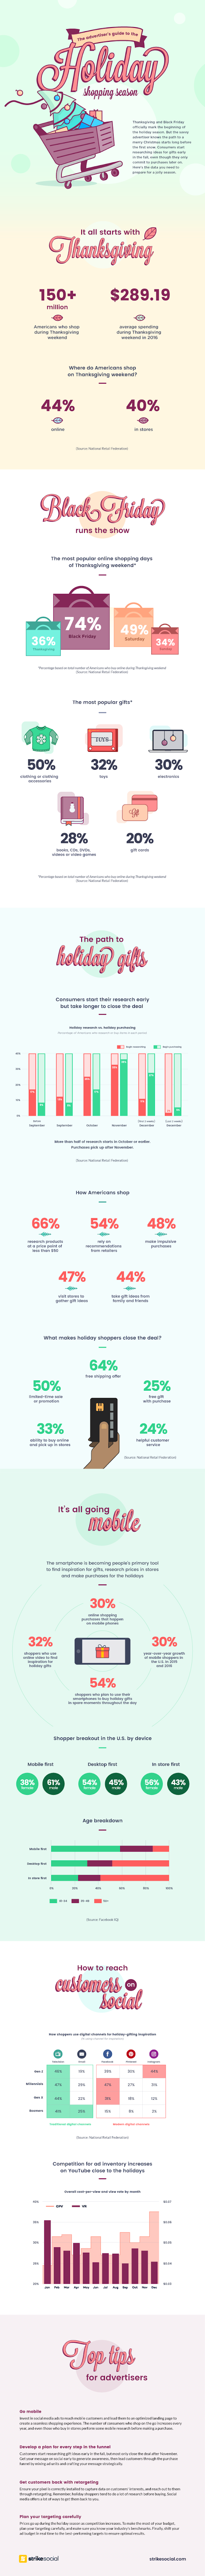 Advertising Tips For The Holiday Season #infographic